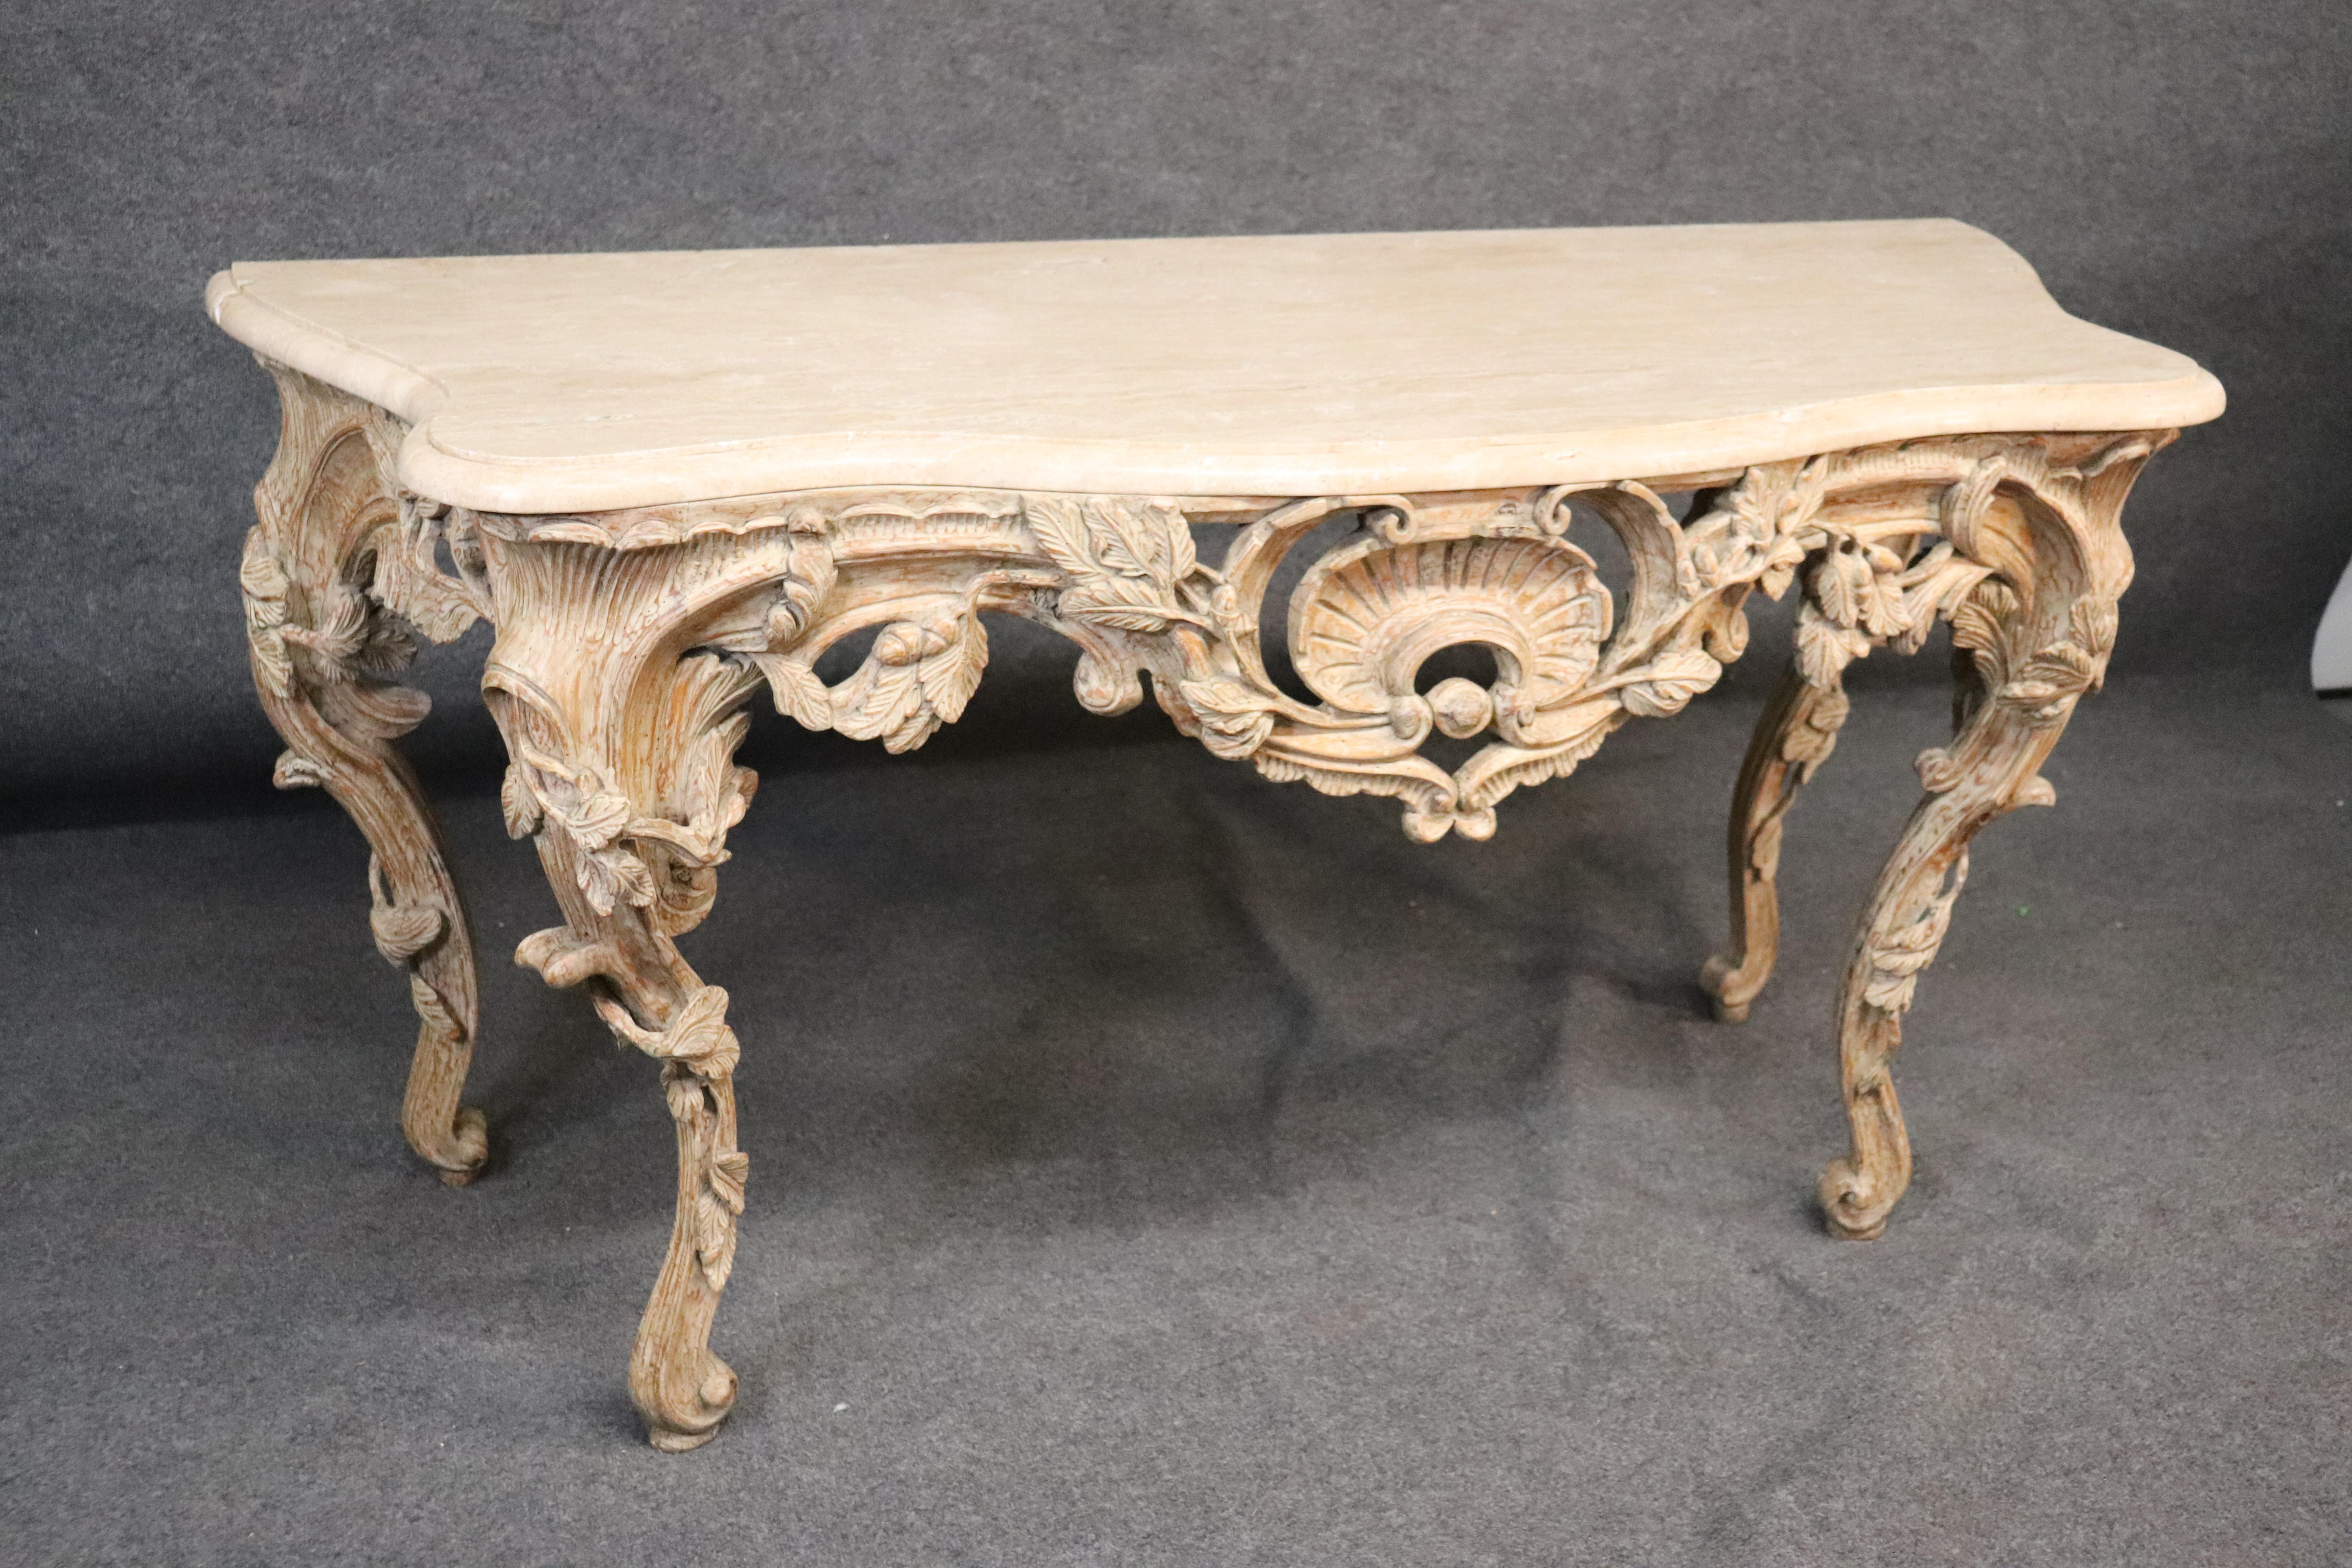 Rococo Revival Rococo Carved Travertine Marble Top French Italian Console Table in Limed White